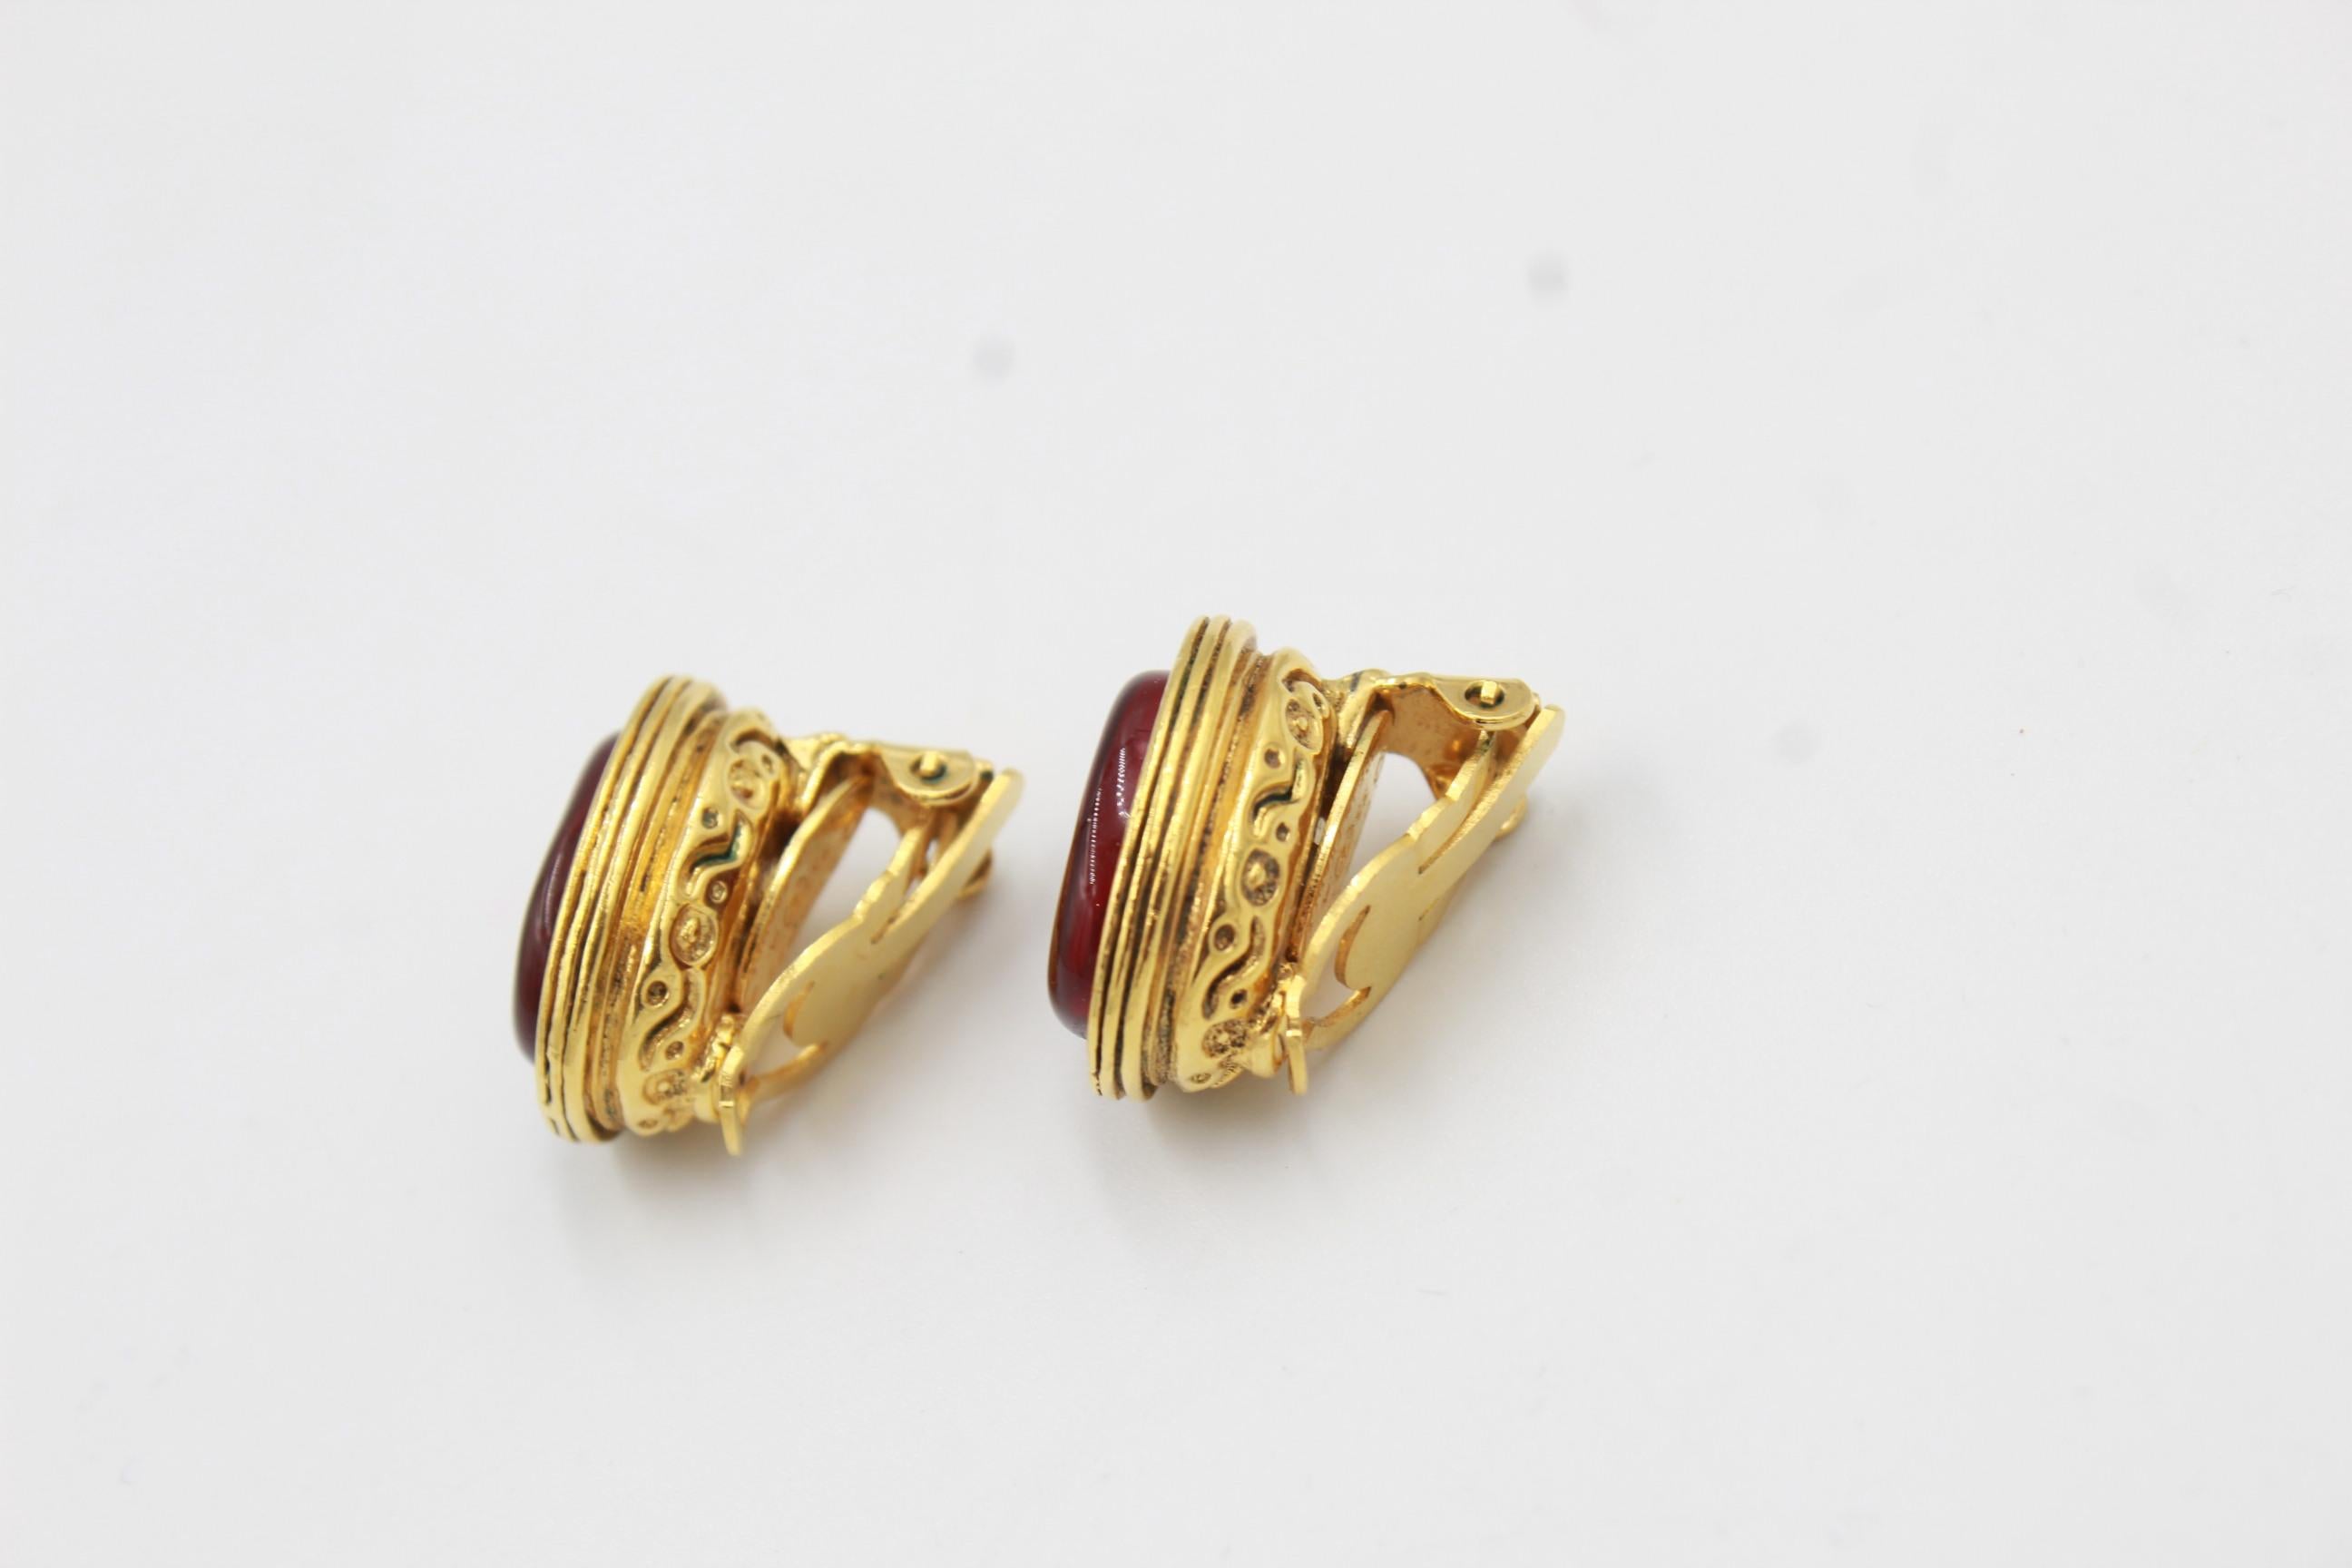 Vintage Chanel errings in Gold metal and red poured glass
Good condition.
2cm x 1.5cm